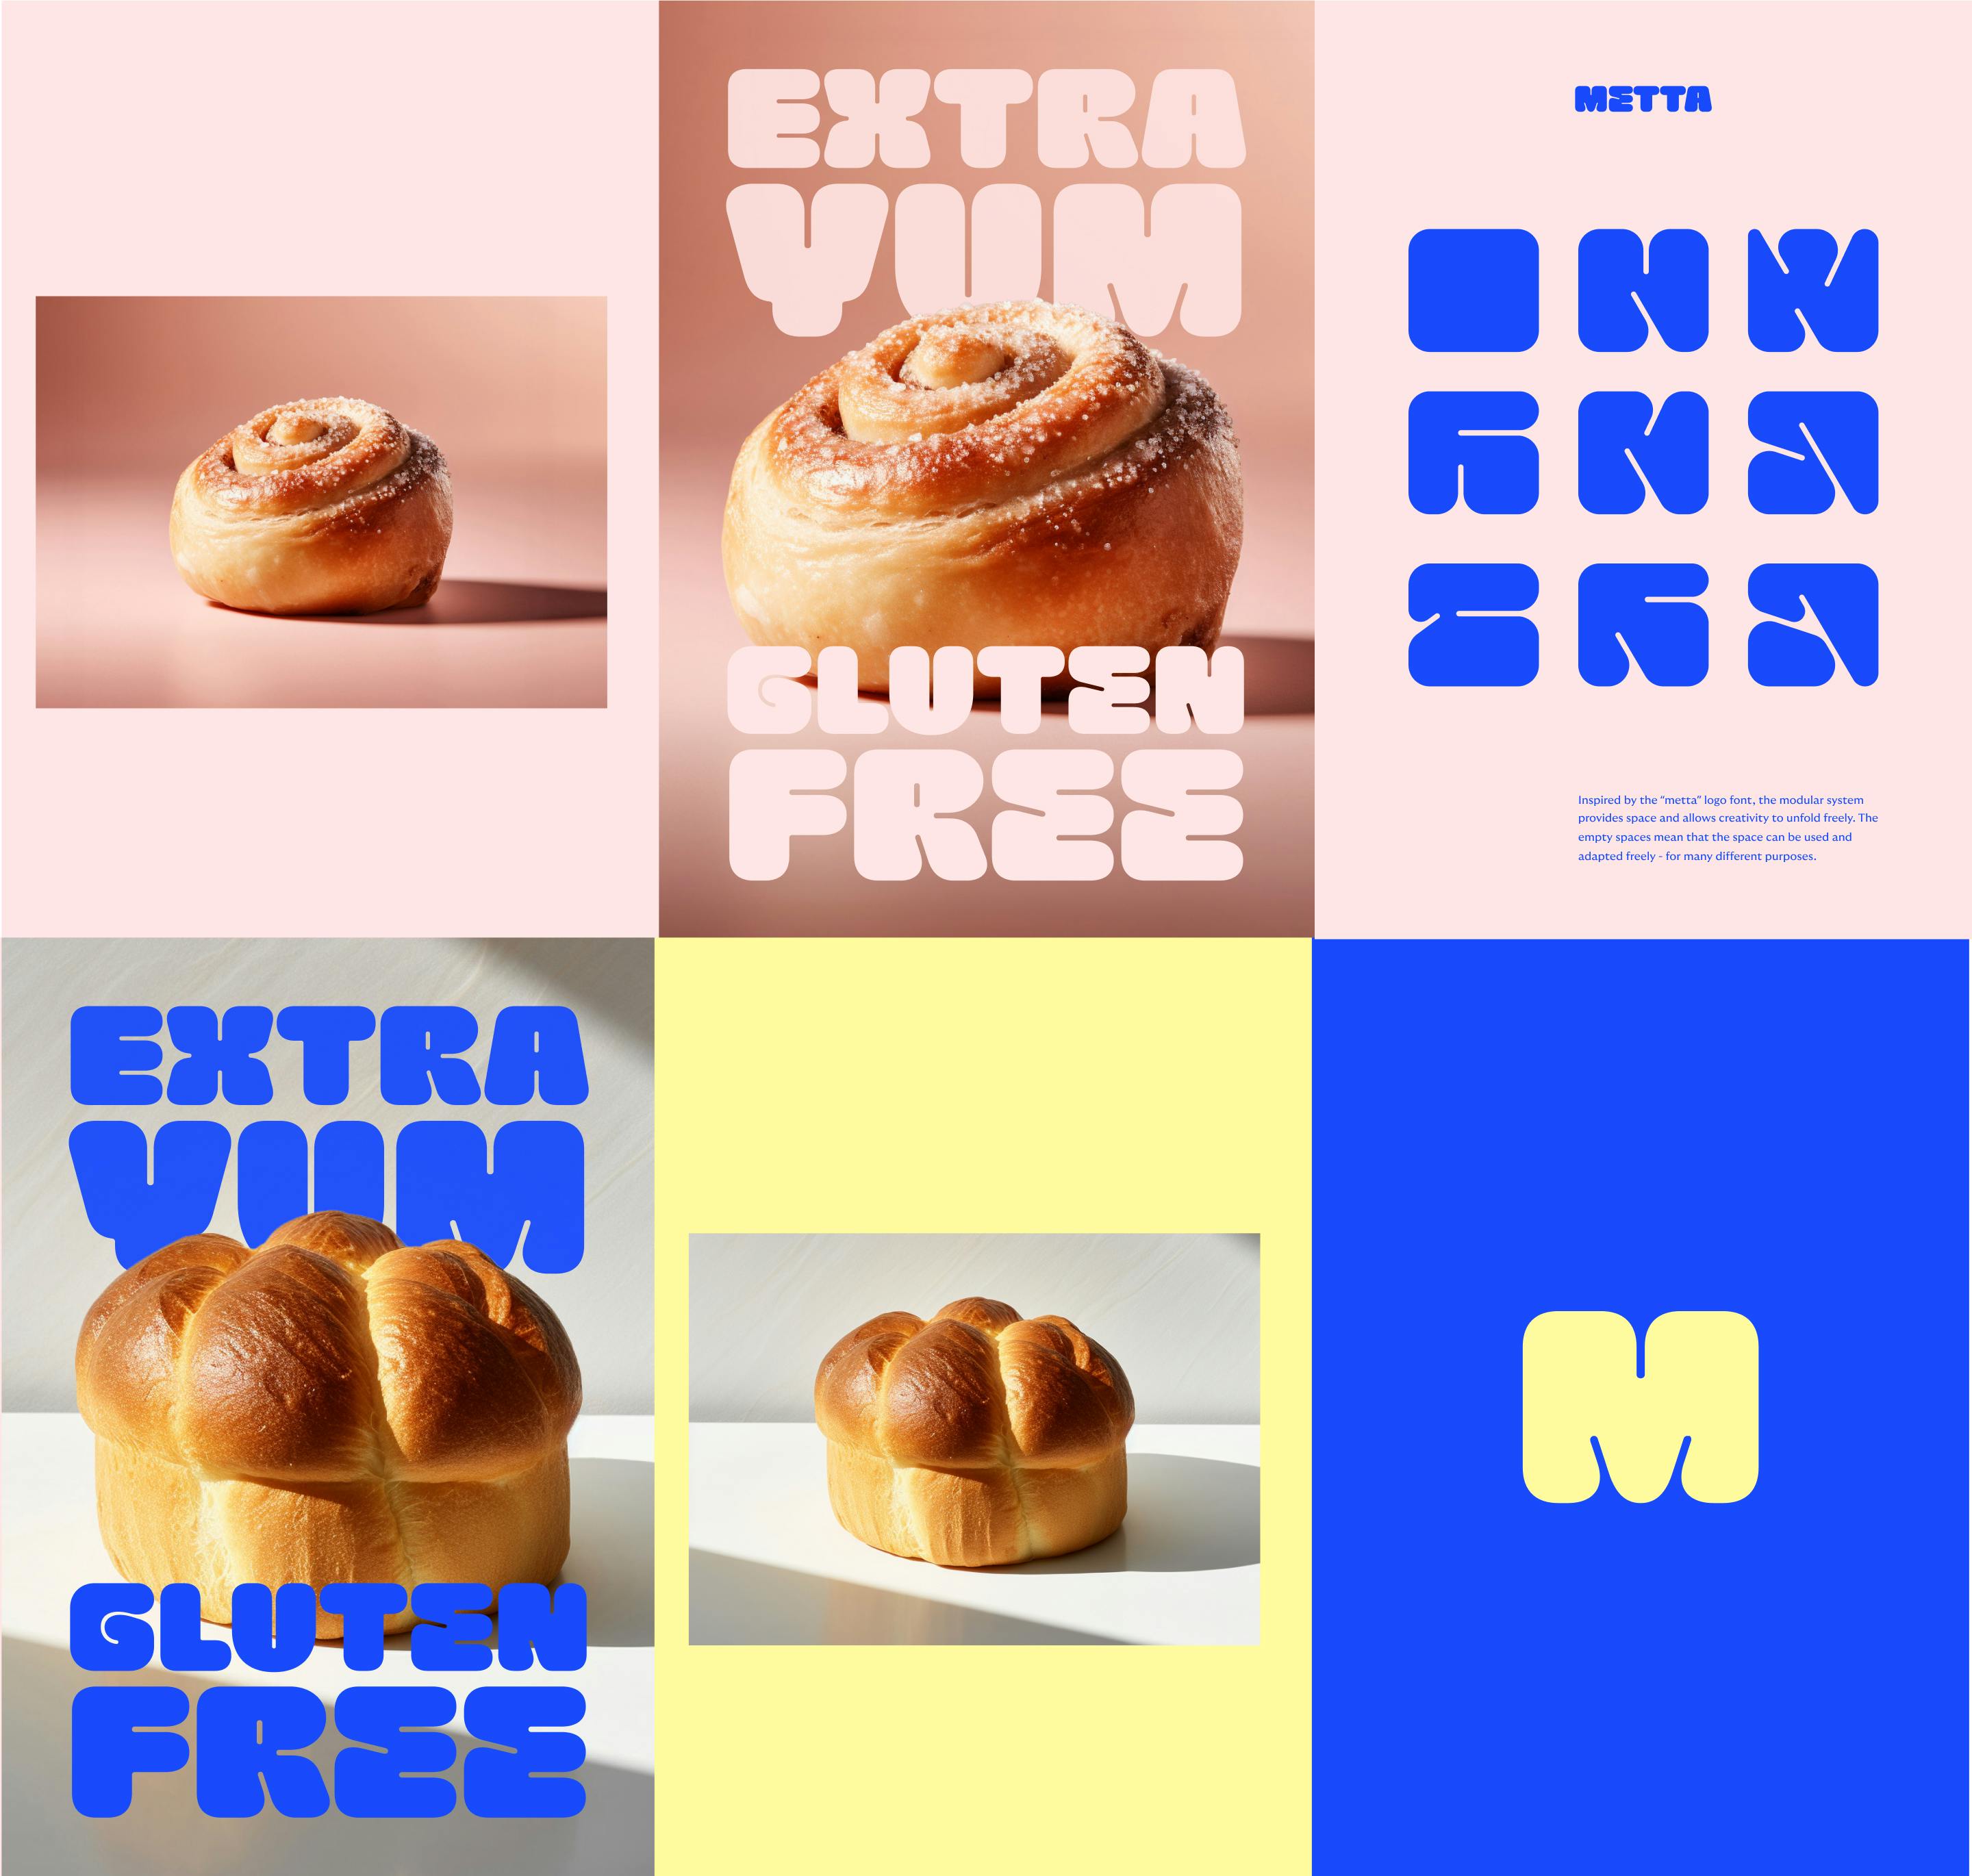 &why: metta coffee shop branding overview